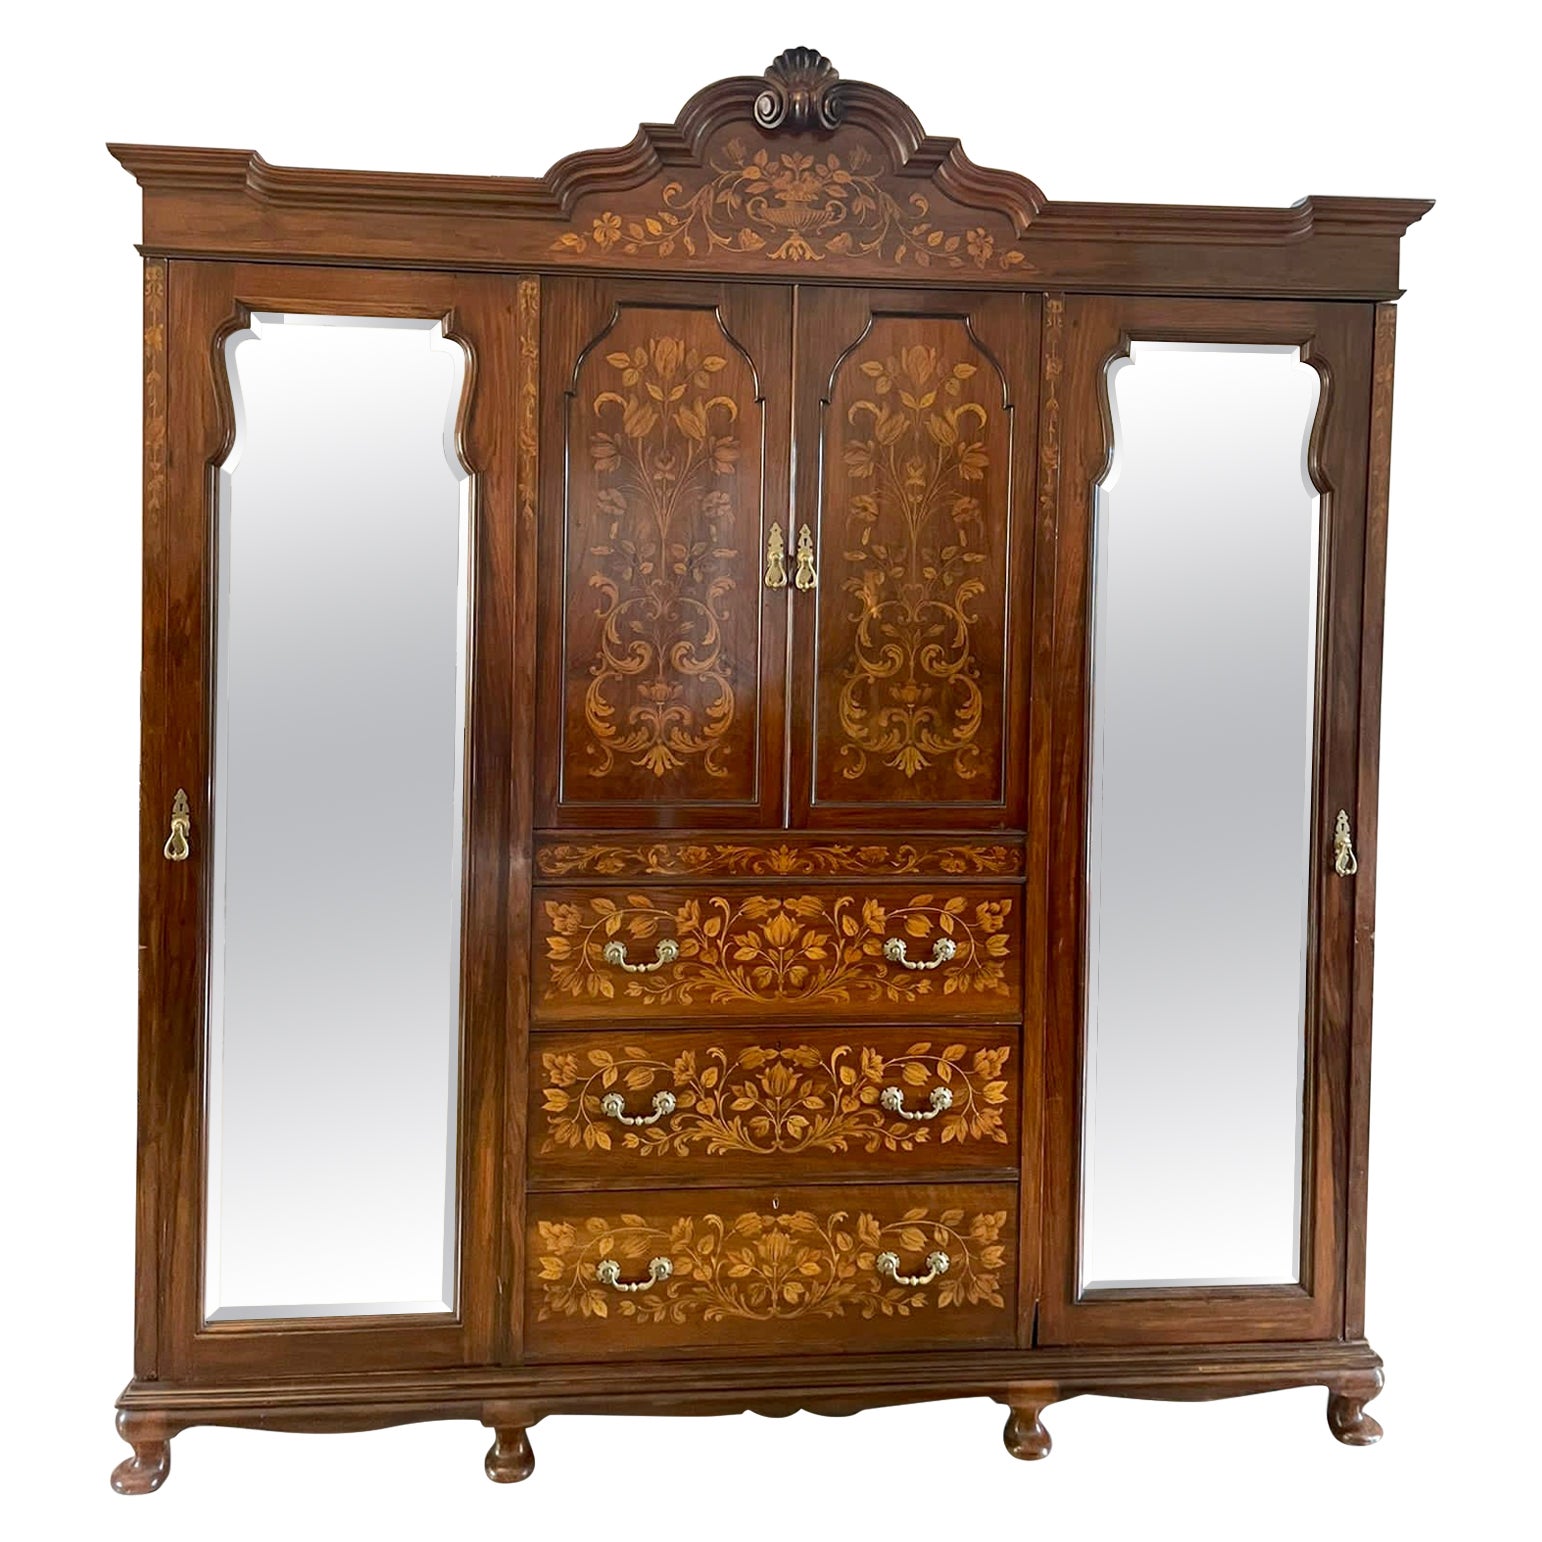 Outstanding Quality Large Antique Figured Walnut Marquetry Inlaid Wardrobe